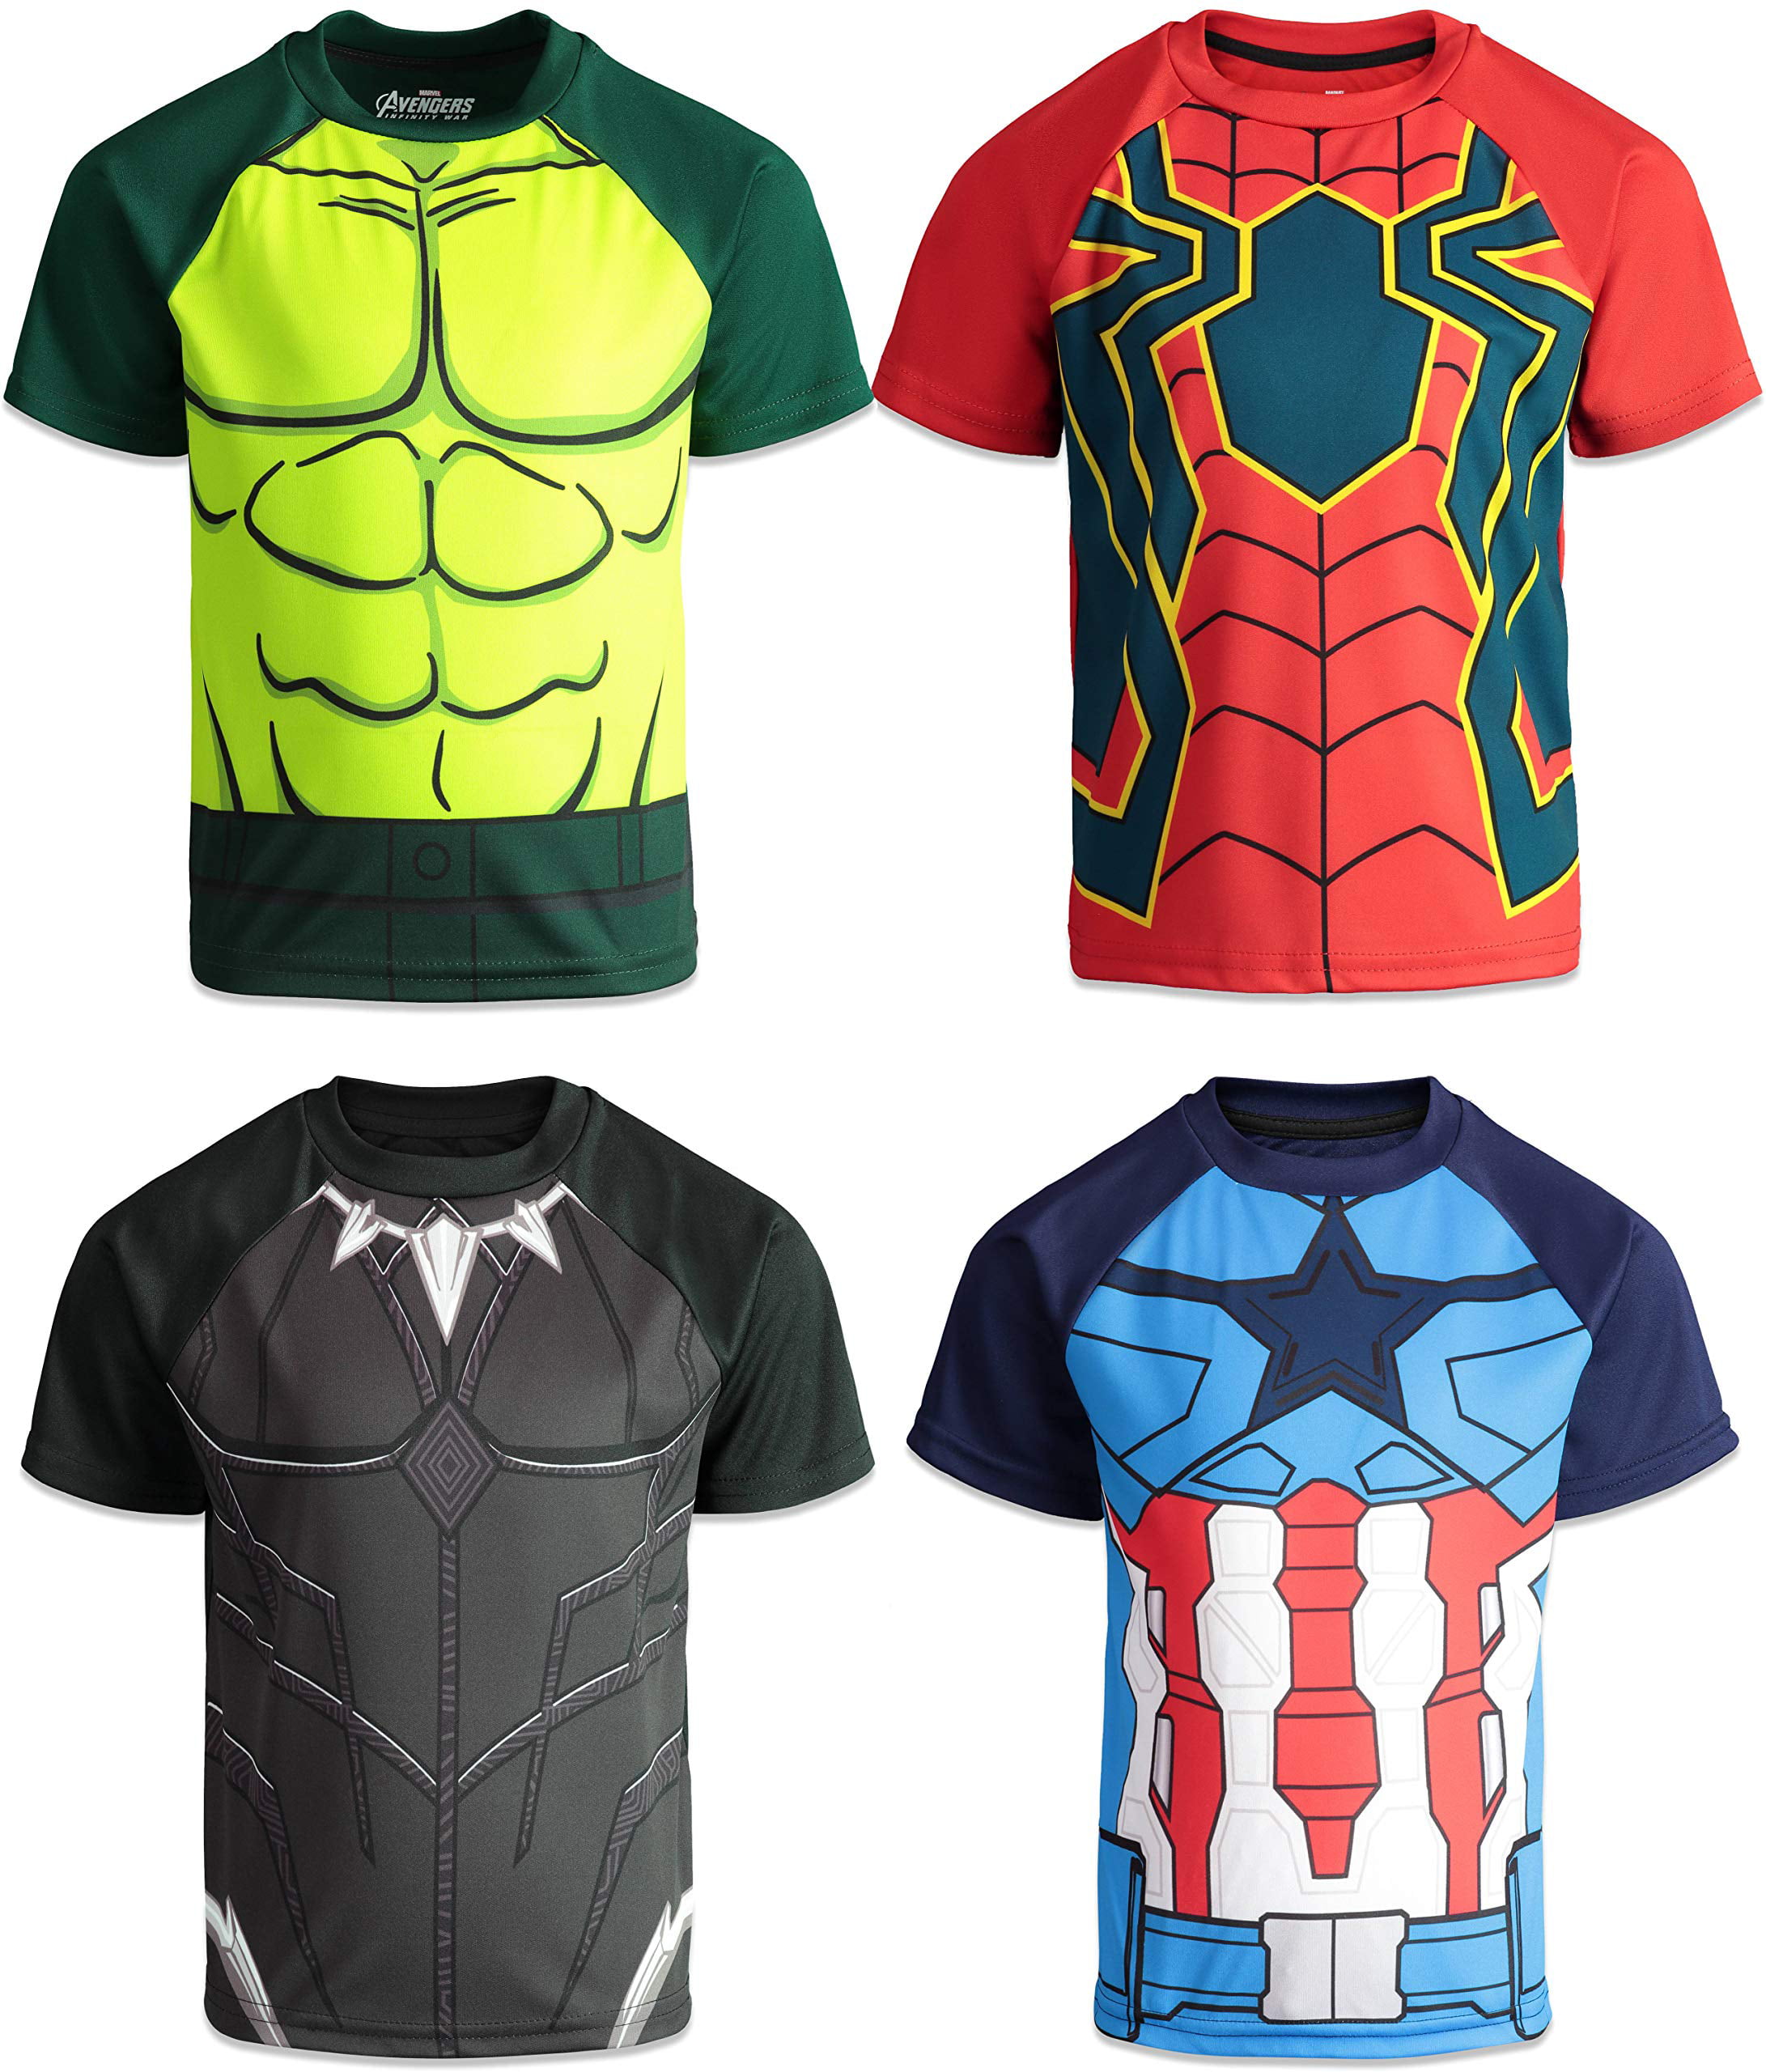 Captain America & The Incredible Hulk Tops & Details about   Boys 4-8 Marvel Avengers Iron Man 